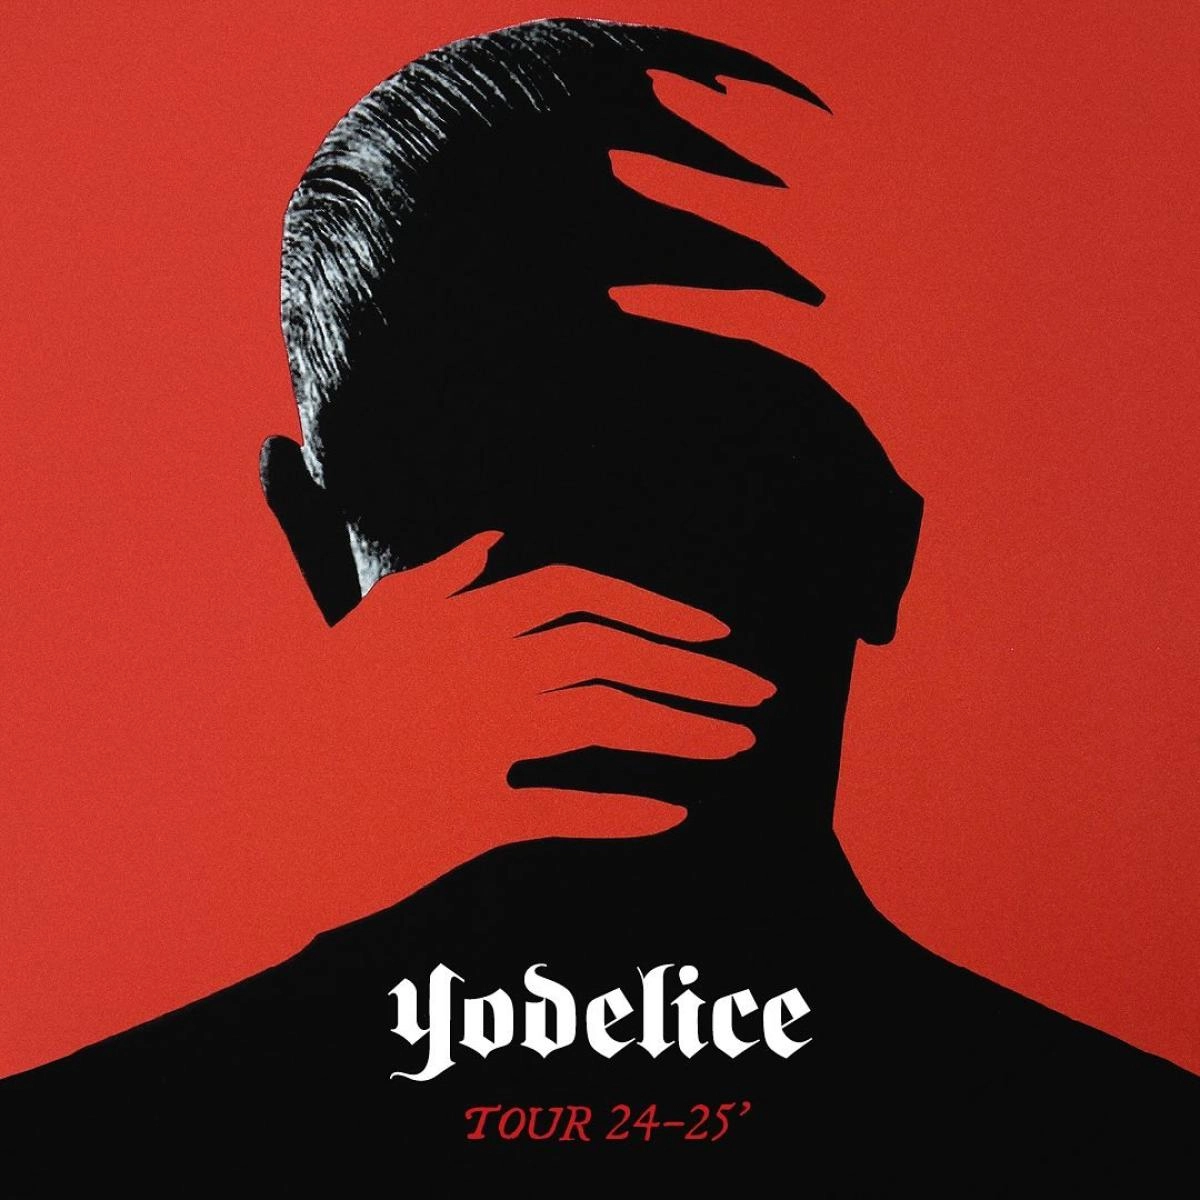 Yodelice in der Le 106 Tickets